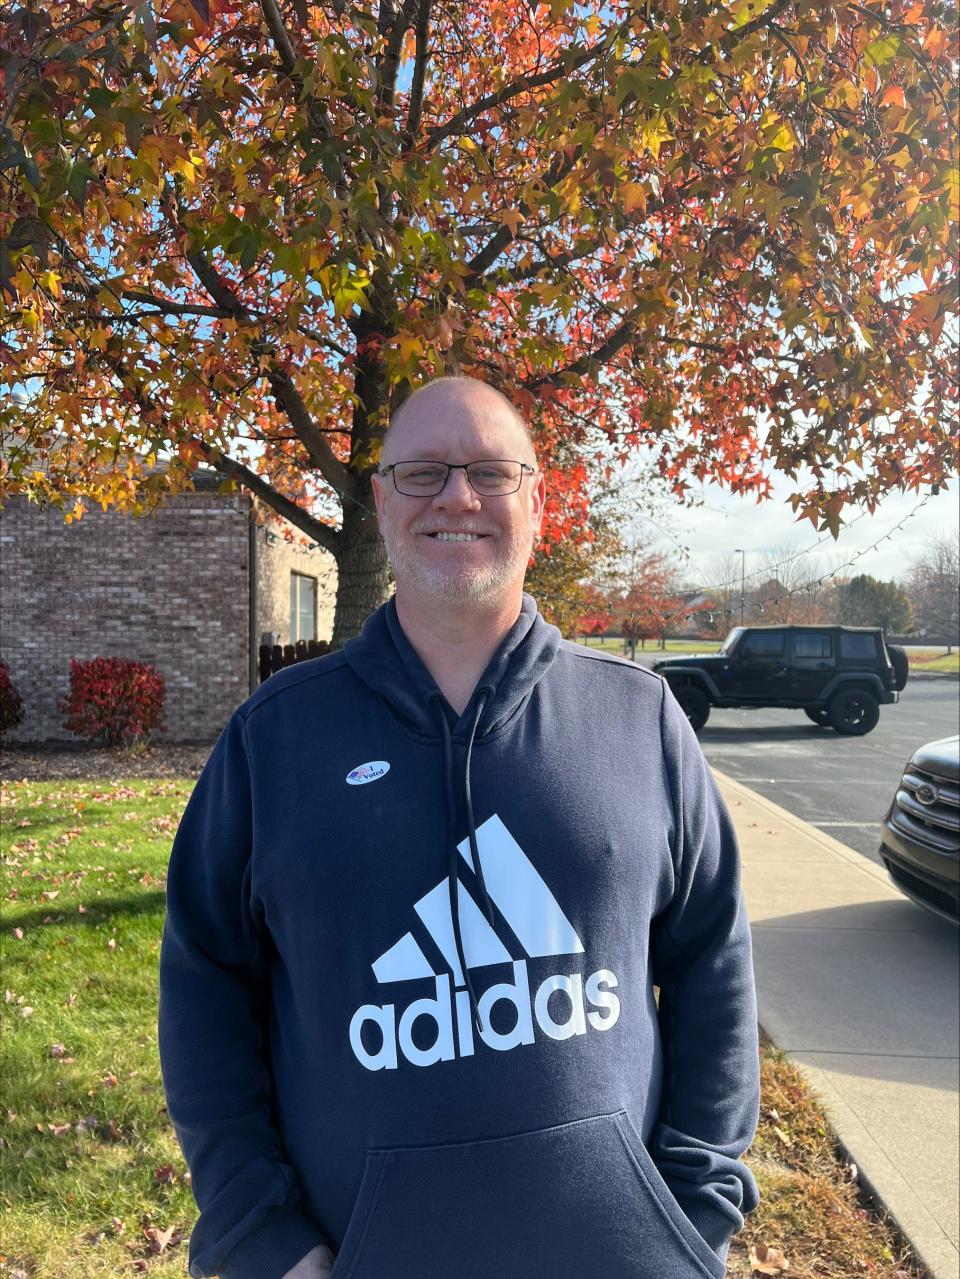 Andrew Urbanski, 46, of Fishers, said he voted in support of the school referendum: “We’re one of the best school districts in the country, and even though my daughter's graduating, we should keep that going for the next generation make an even better place to live.”